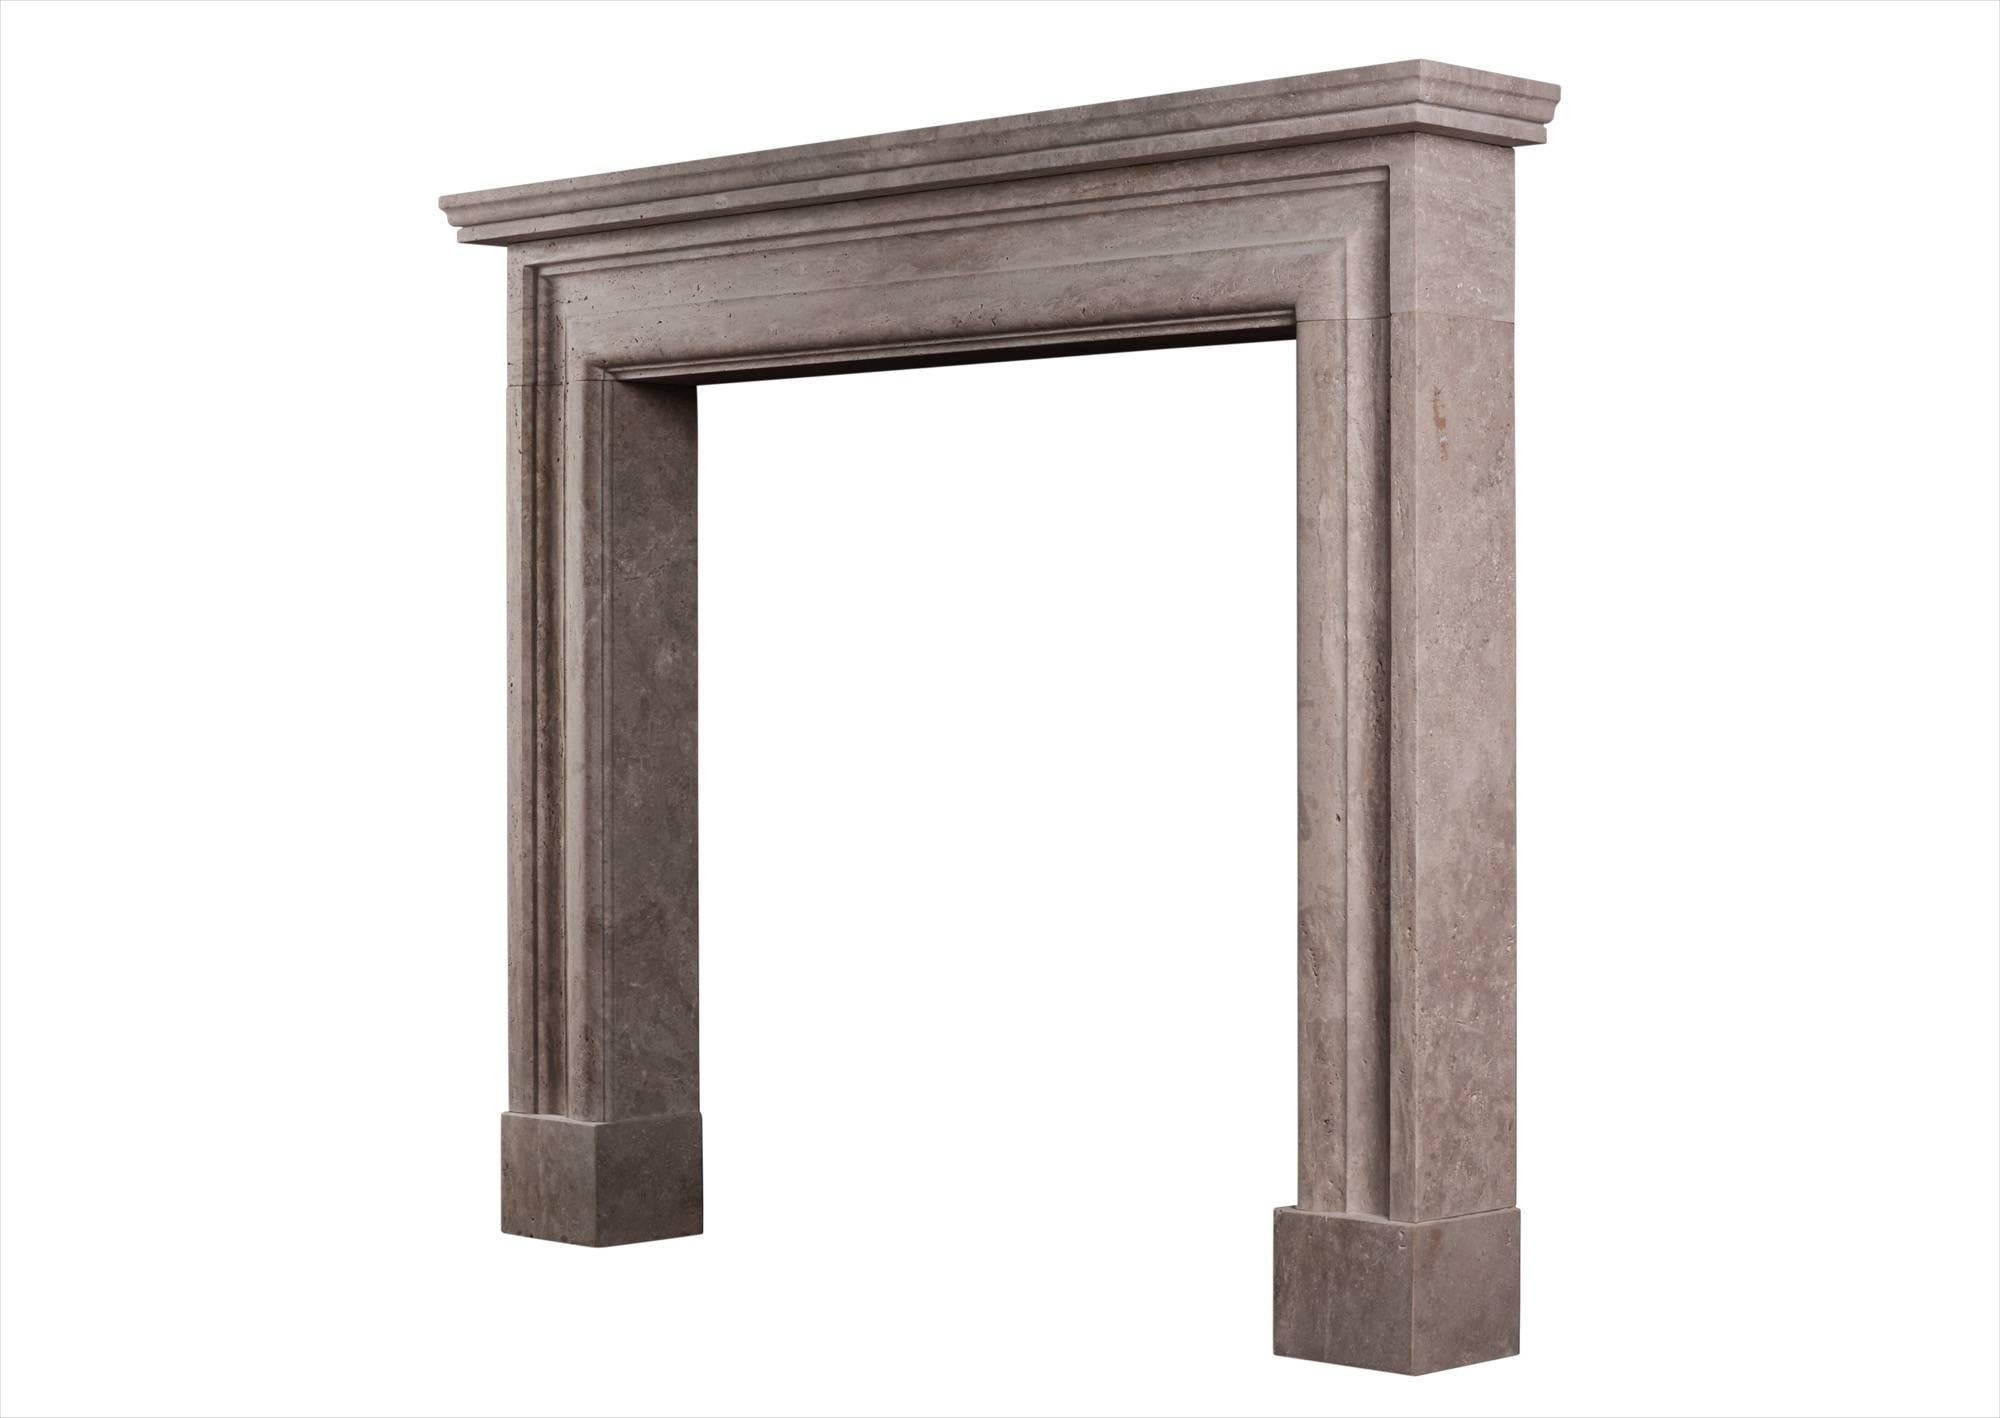 English Bolection Fireplace in Travertine Stone In Good Condition For Sale In London, GB